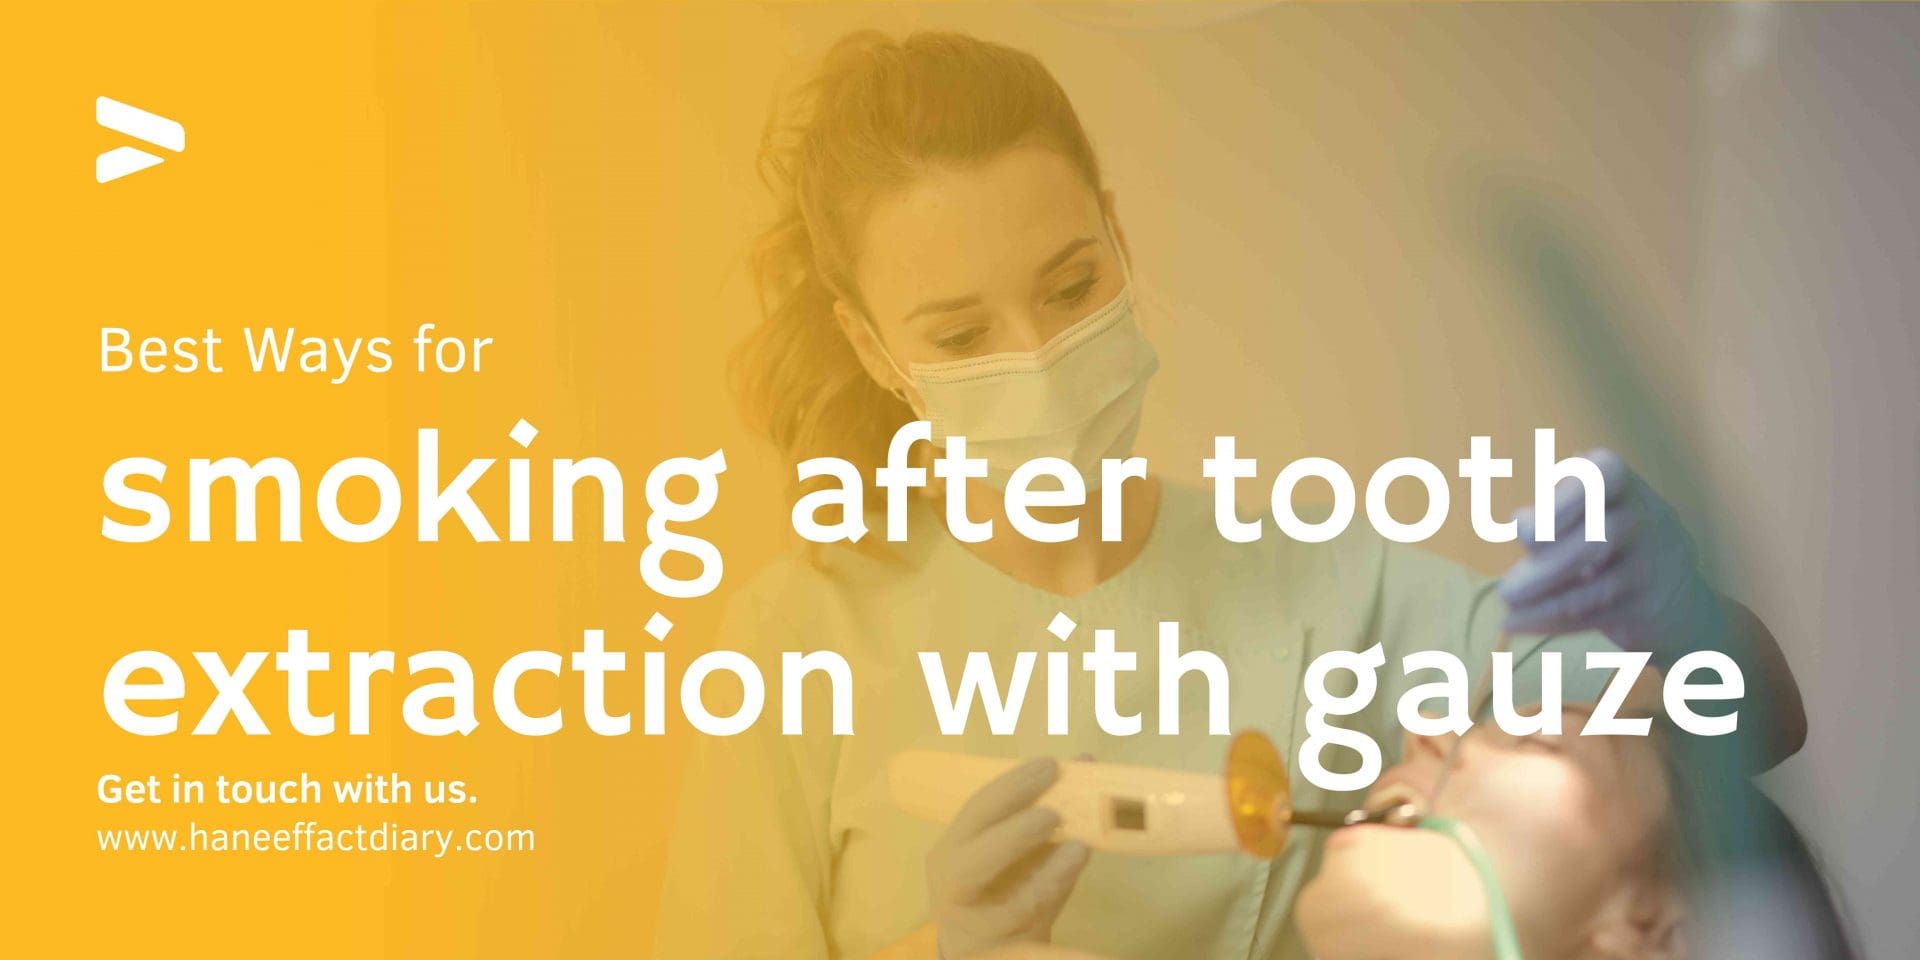 Best Way to smoking after tooth extraction with gauze 2022